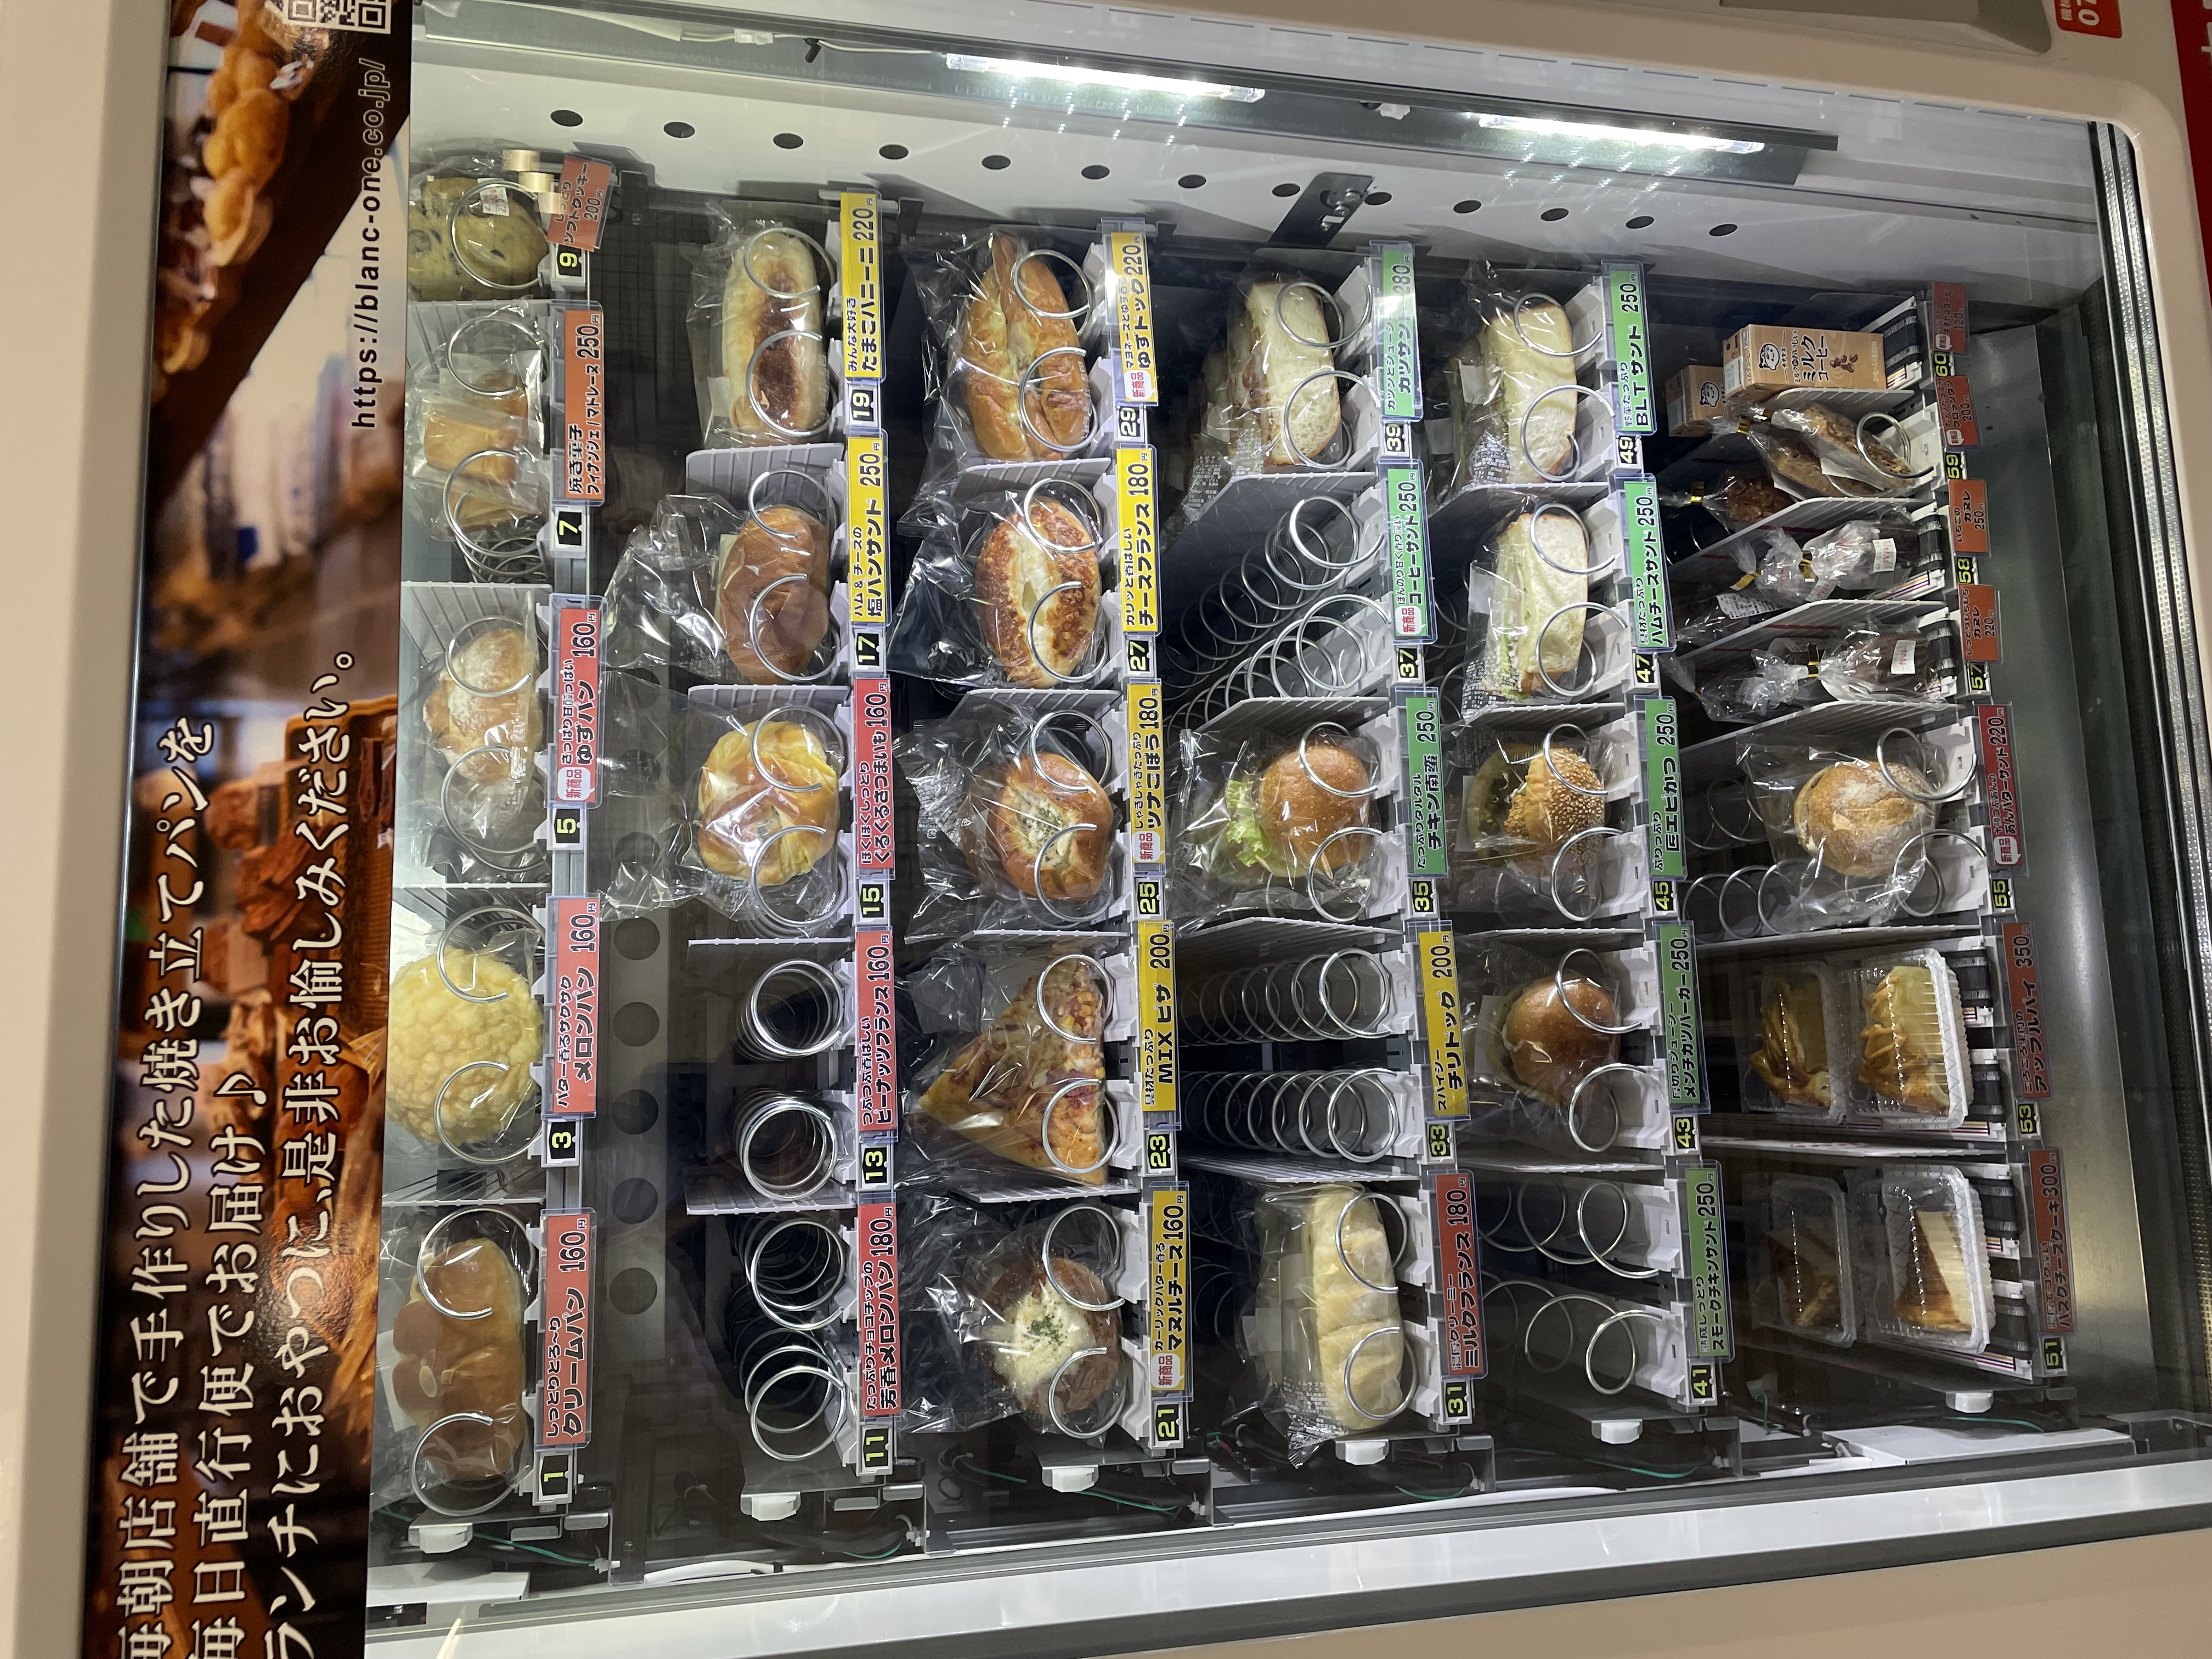 Vending machine with breads